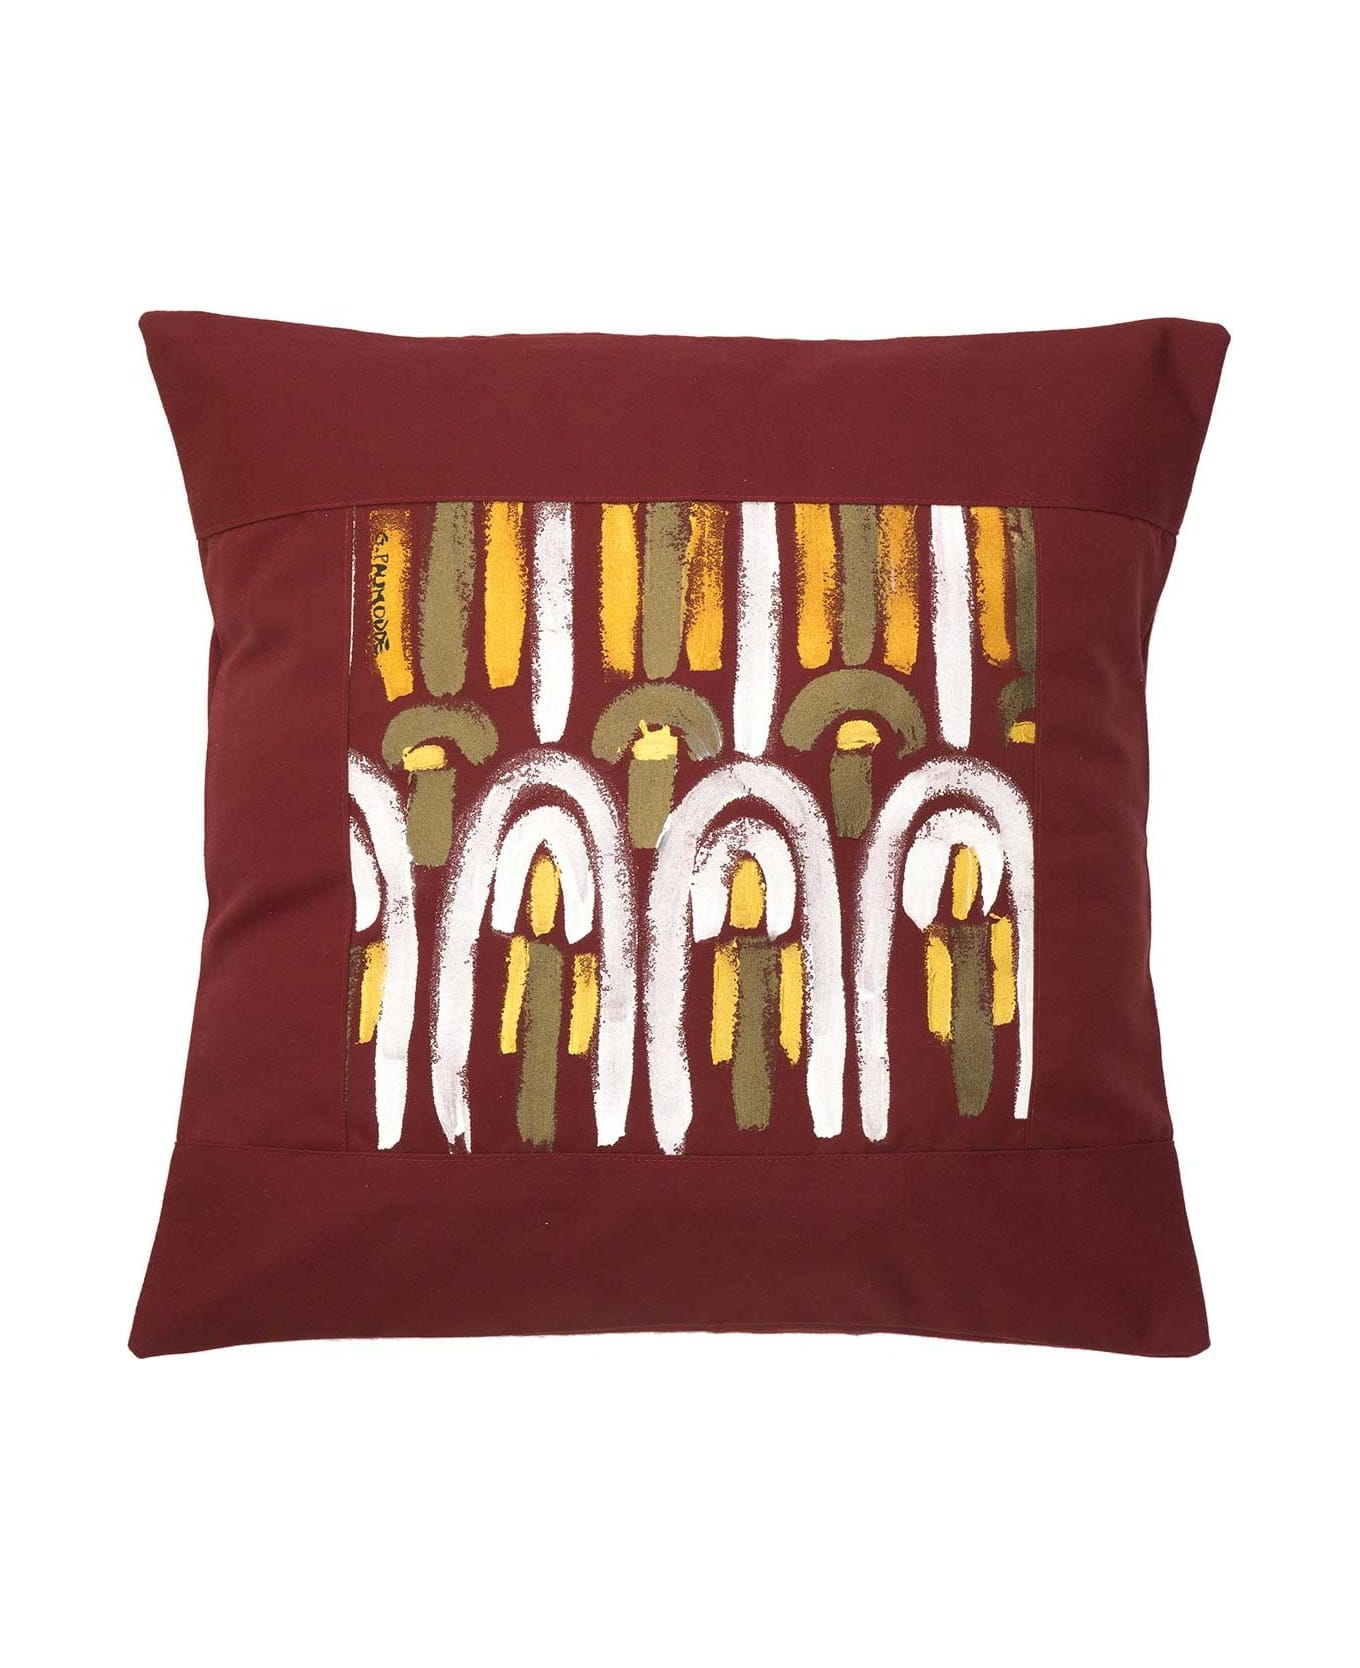 Le Botteghe su Gologone Acrylic Hand Painted Outdoor Cushion 80x80 cm - Red Fantasy